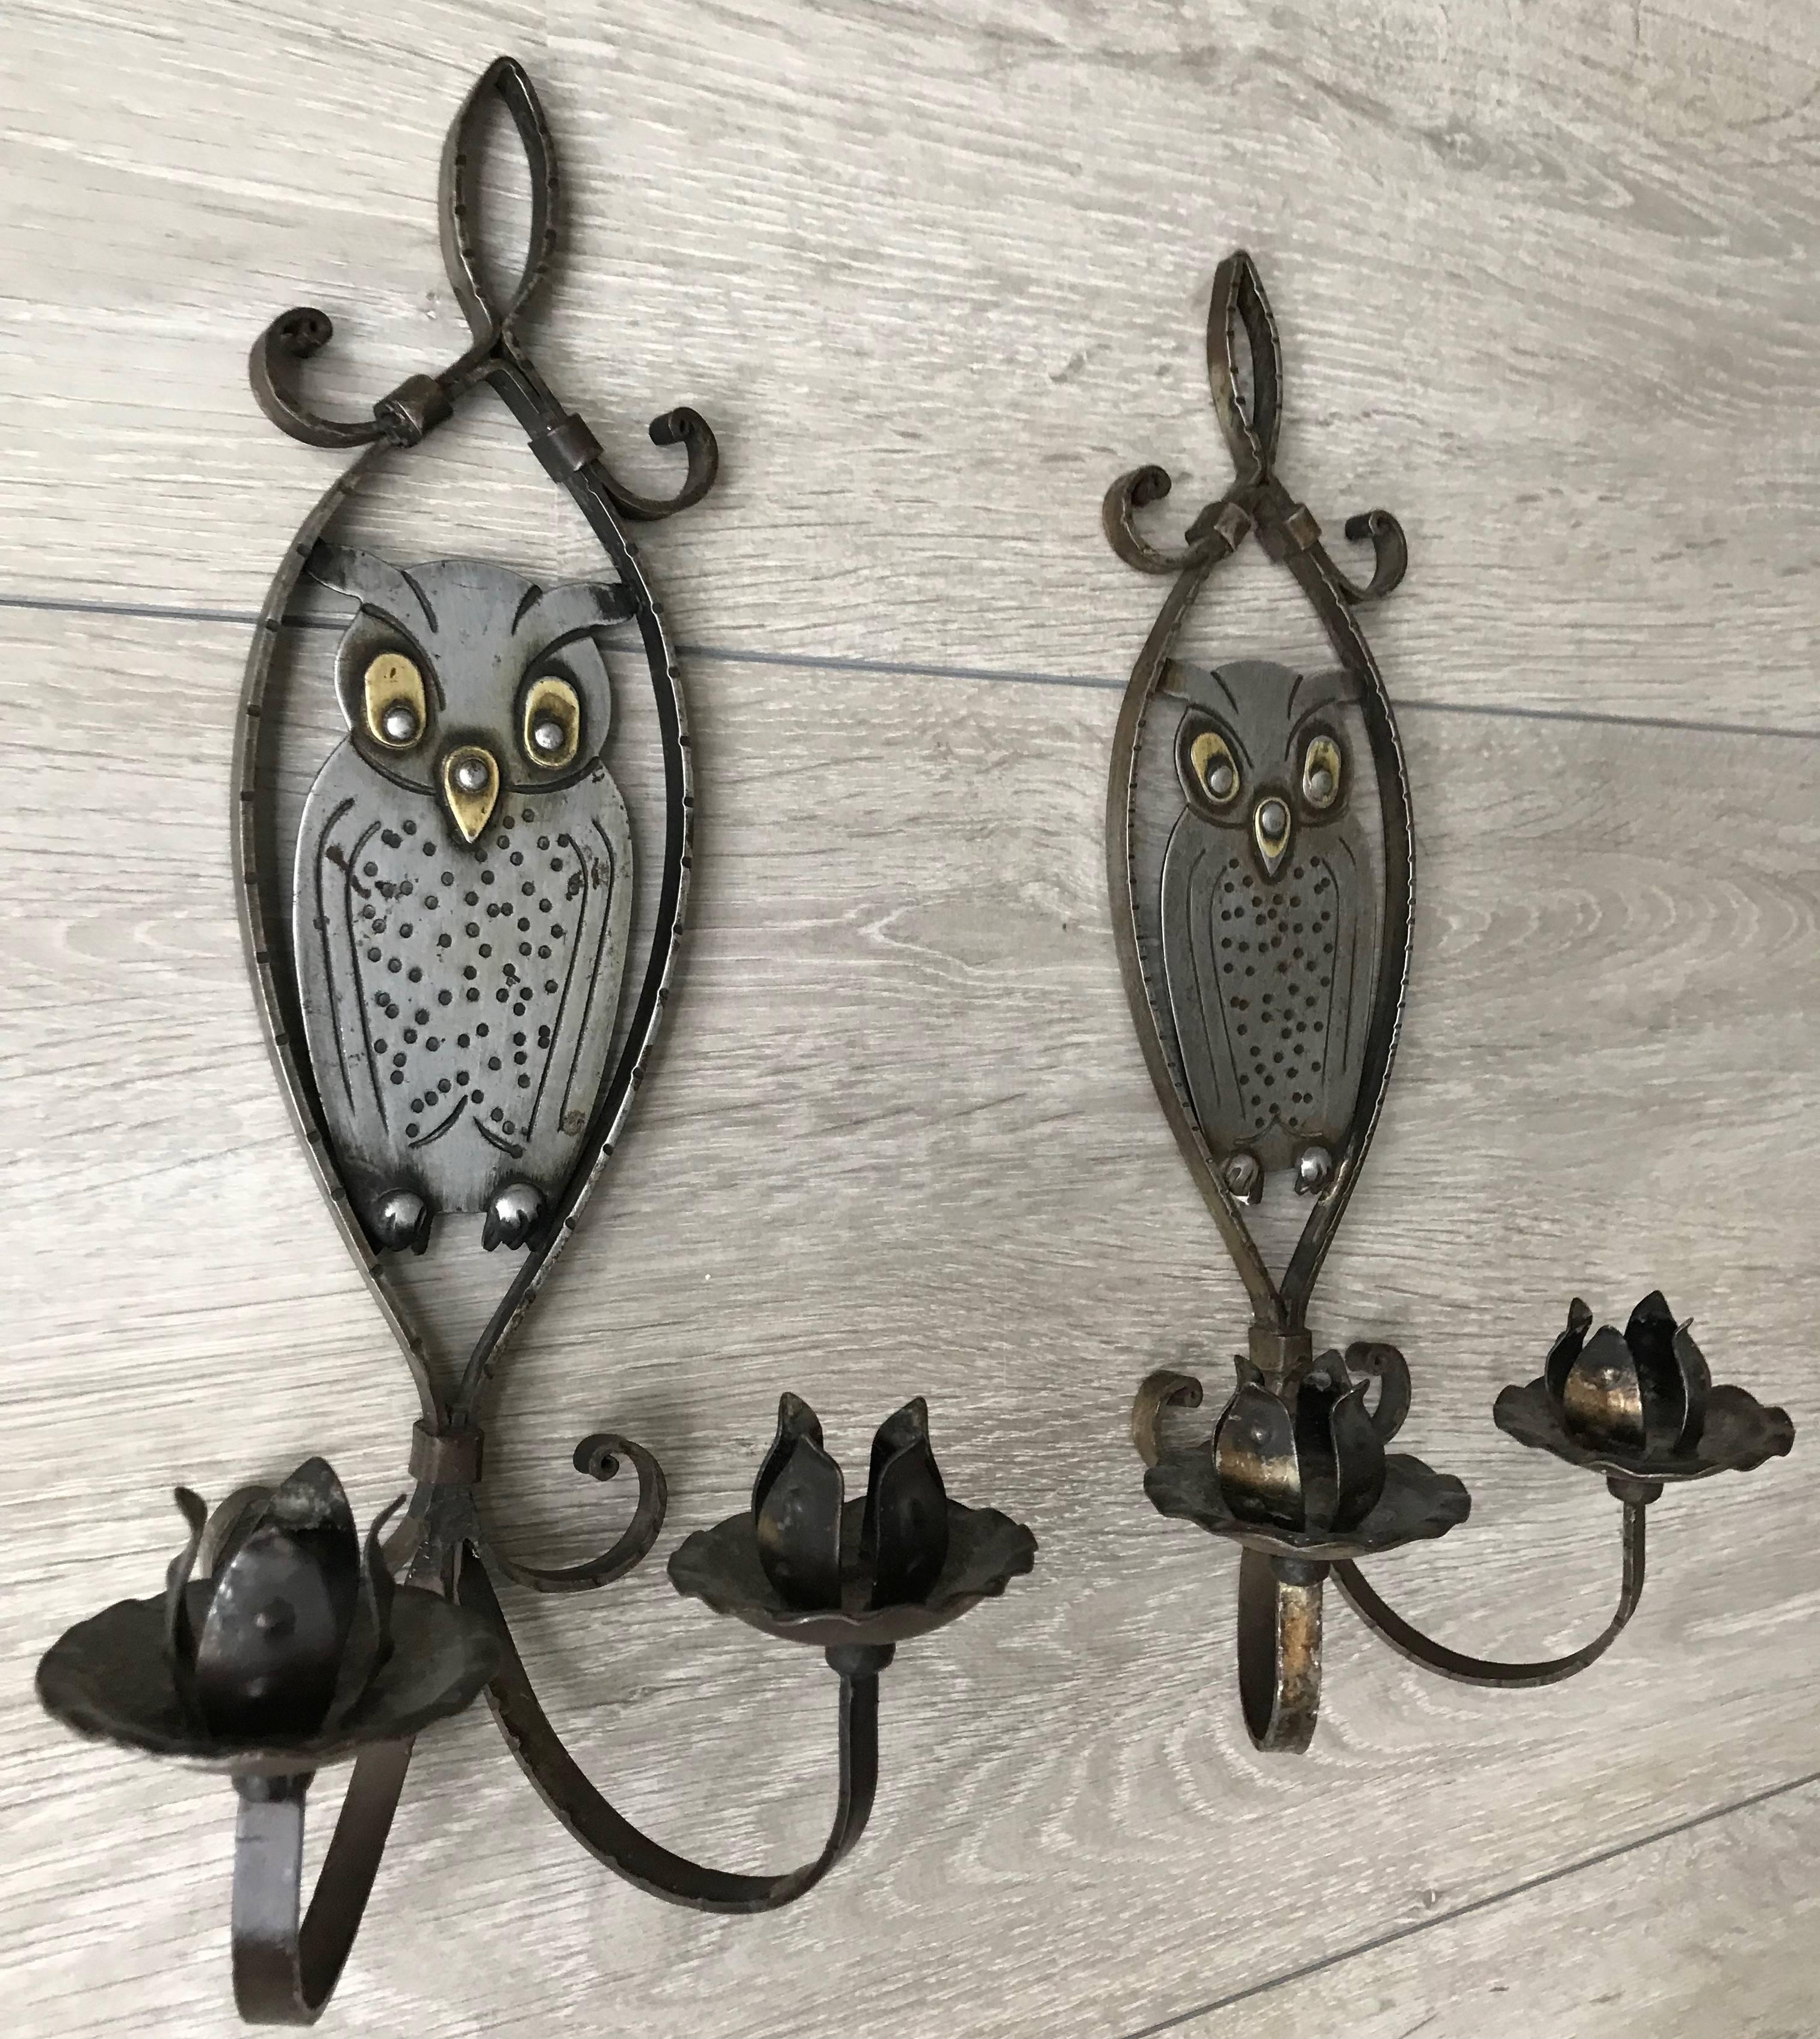 Lovely pair of hand-forged and hand-hammered iron wall sconces by Hugo bergere.

This rare and all handcrafted pair of candleholders is in very good condition and they are both marked Goberg. The owl as the international symbol for learning and